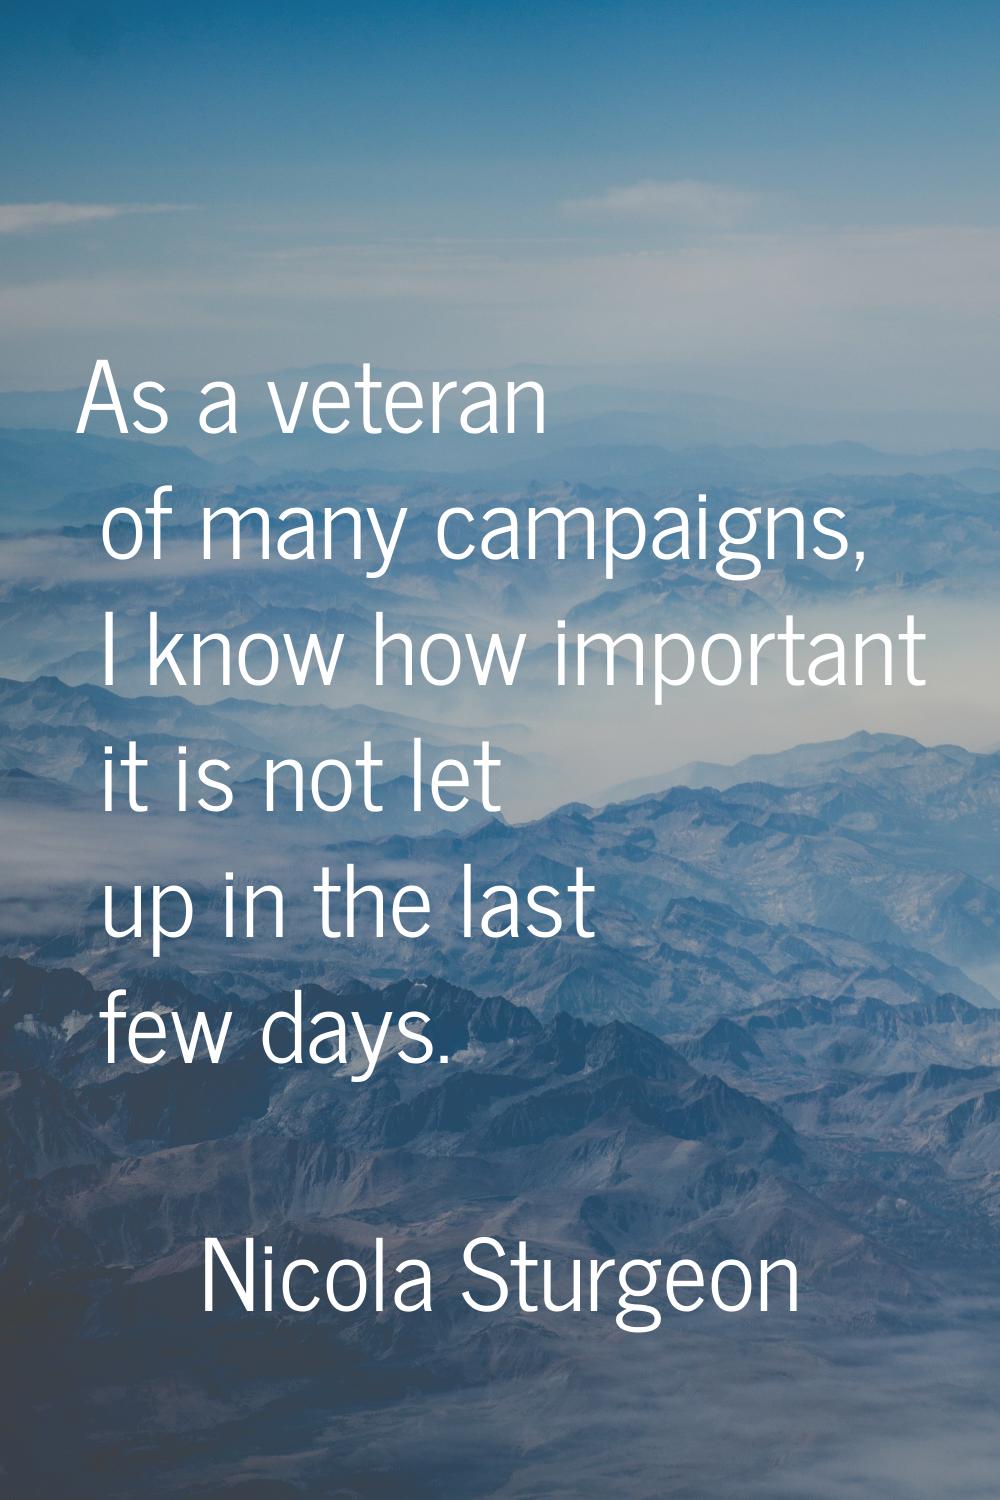 As a veteran of many campaigns, I know how important it is not let up in the last few days.